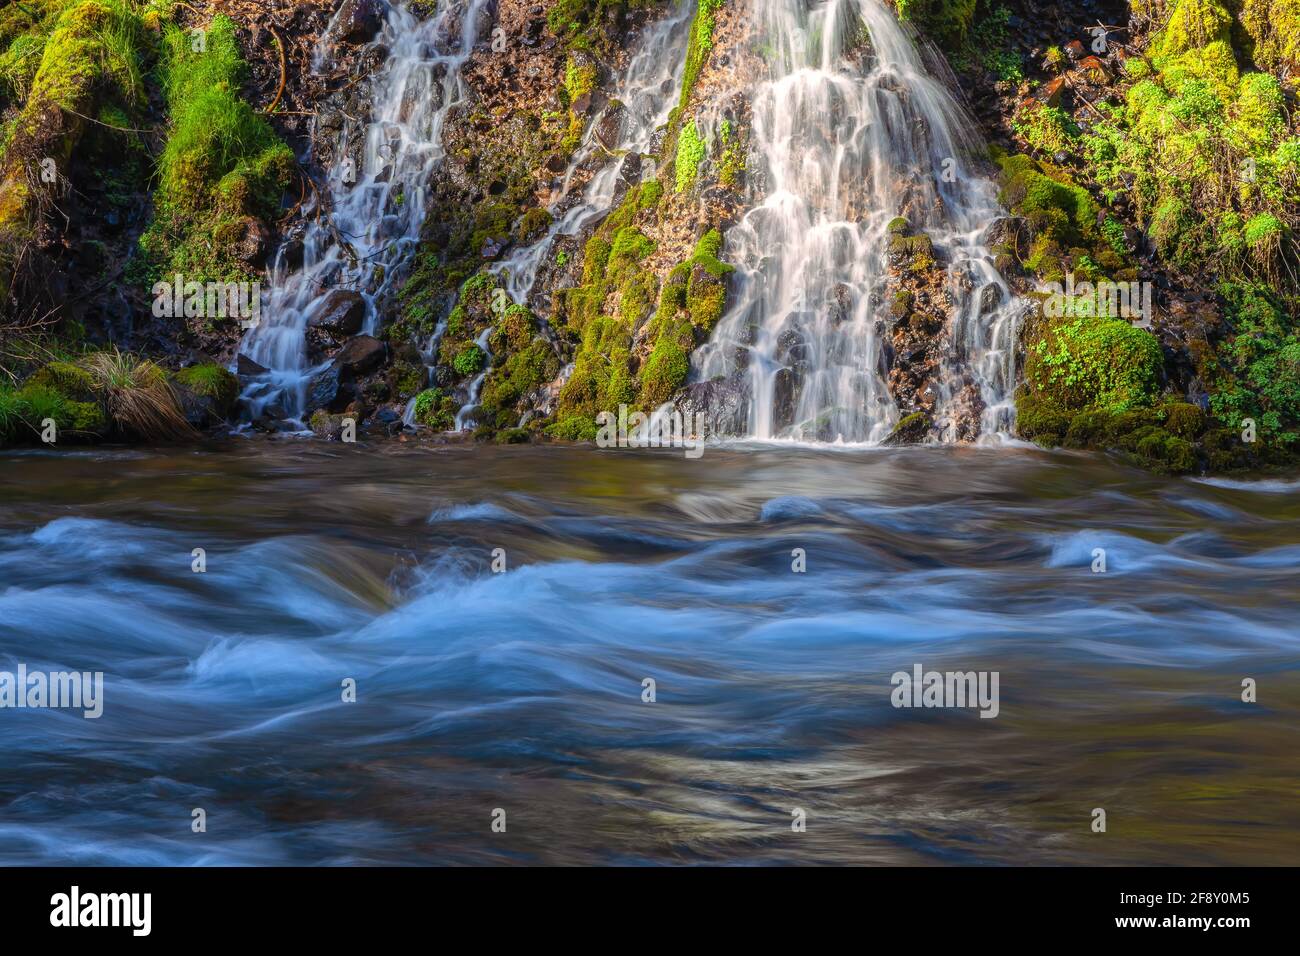 Small cascades by the Burney Creek at Burney  Falls State Park, Shasta County, California, United States. Stock Photo